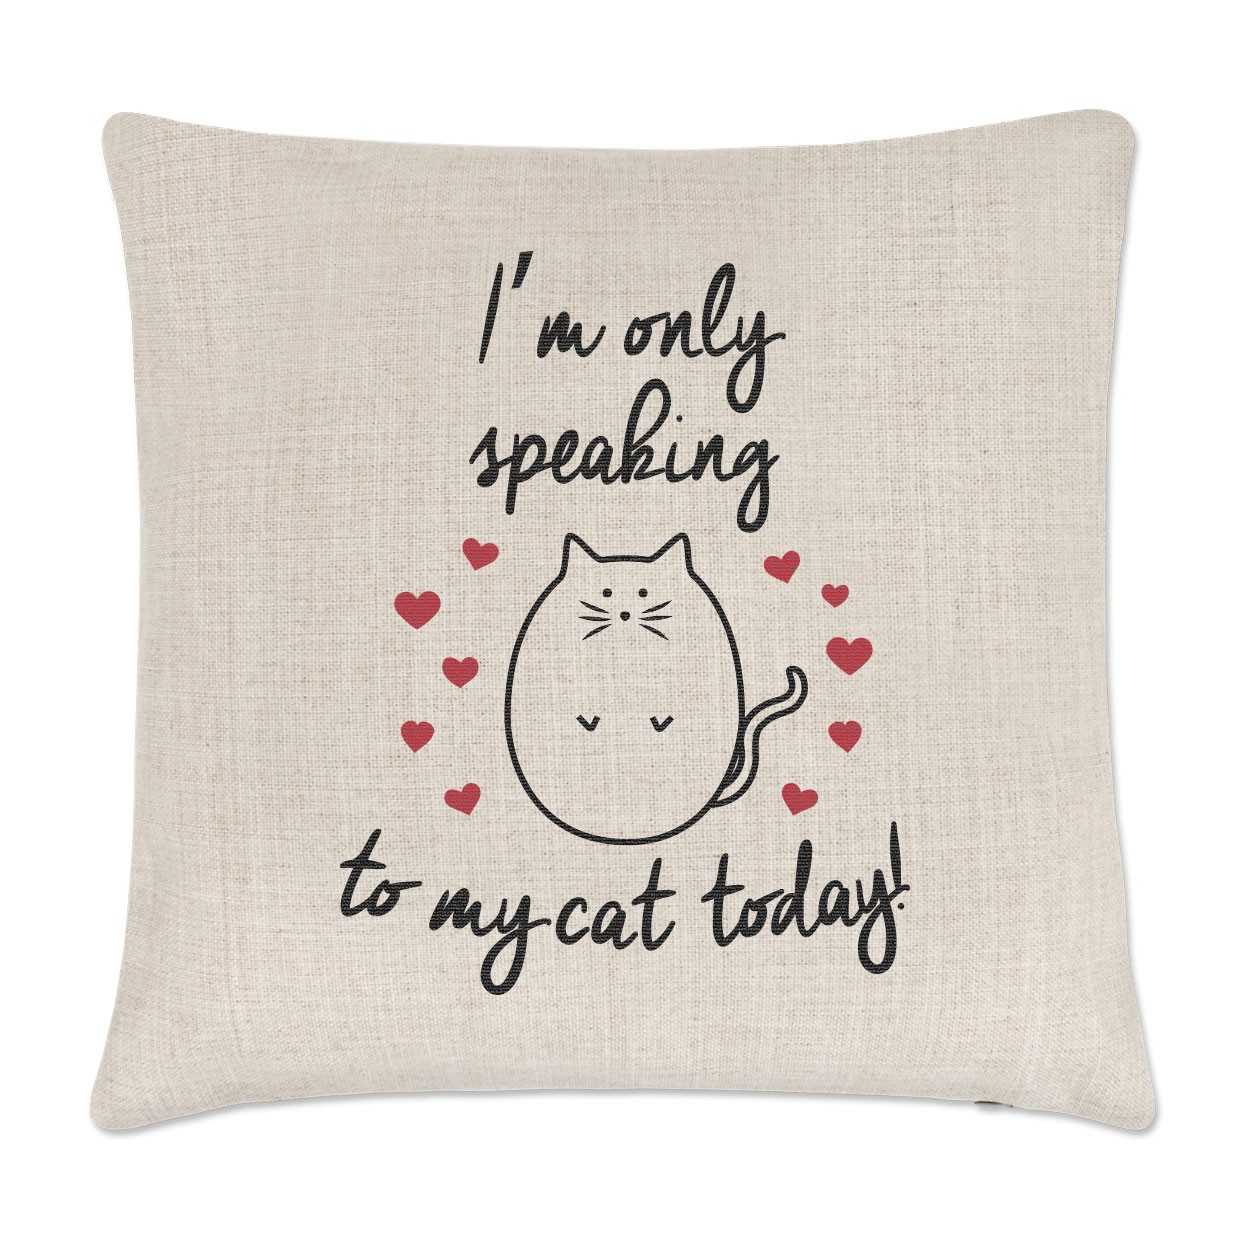 I'm Only Speaking To My Cat Today Linen Cushion Cover